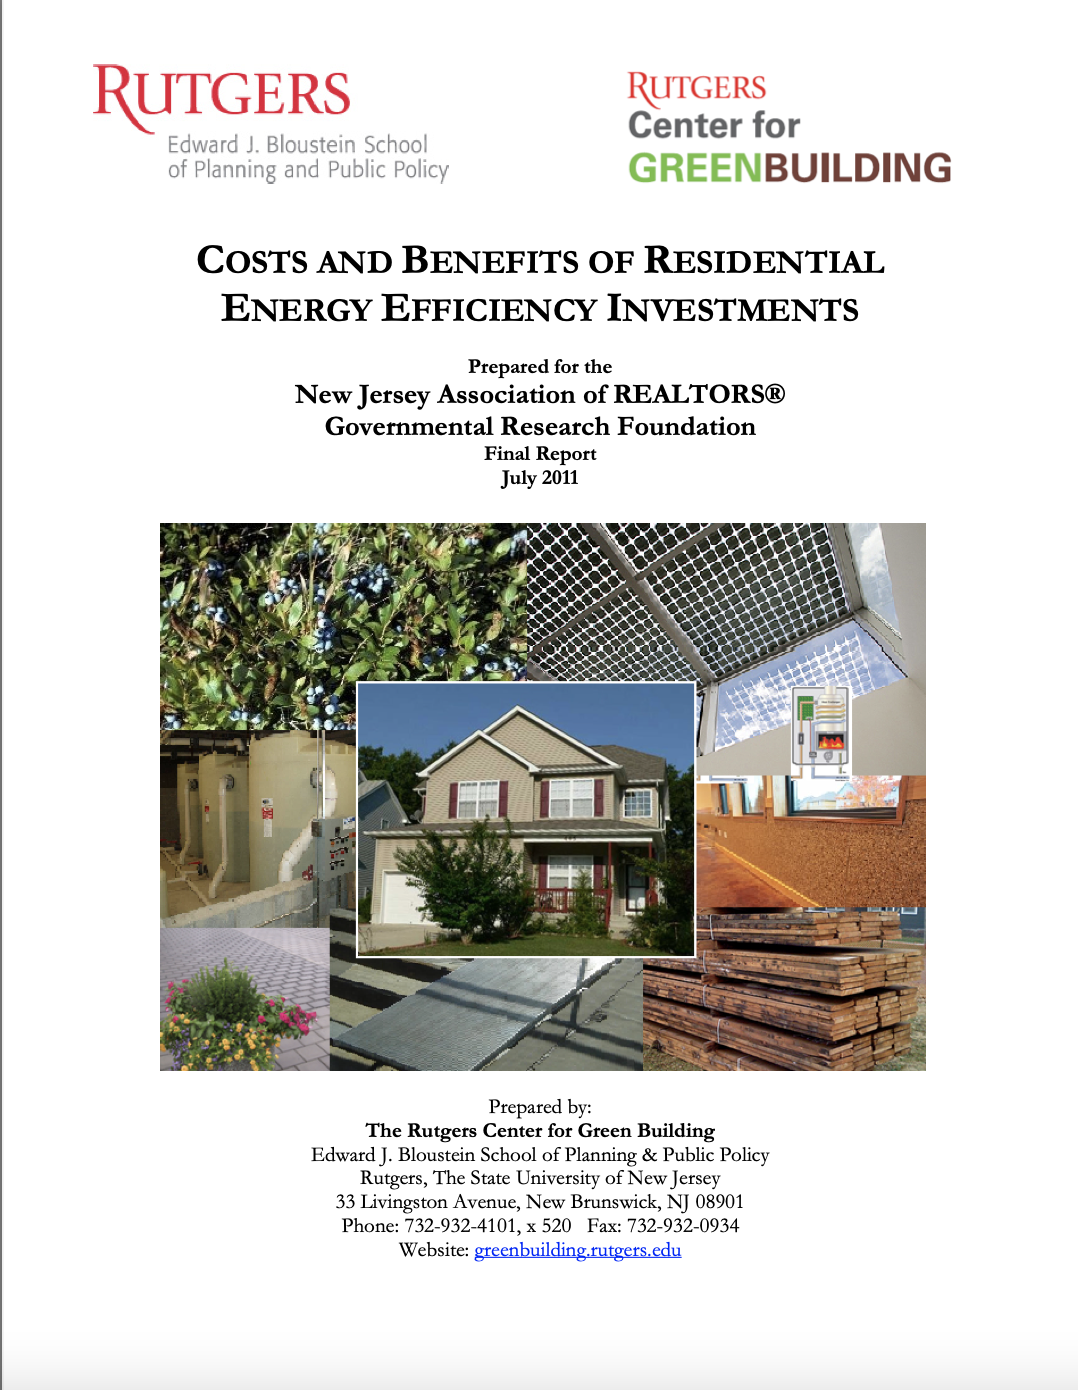 Costs and Benefits of Residential Energy Efficiency Investments